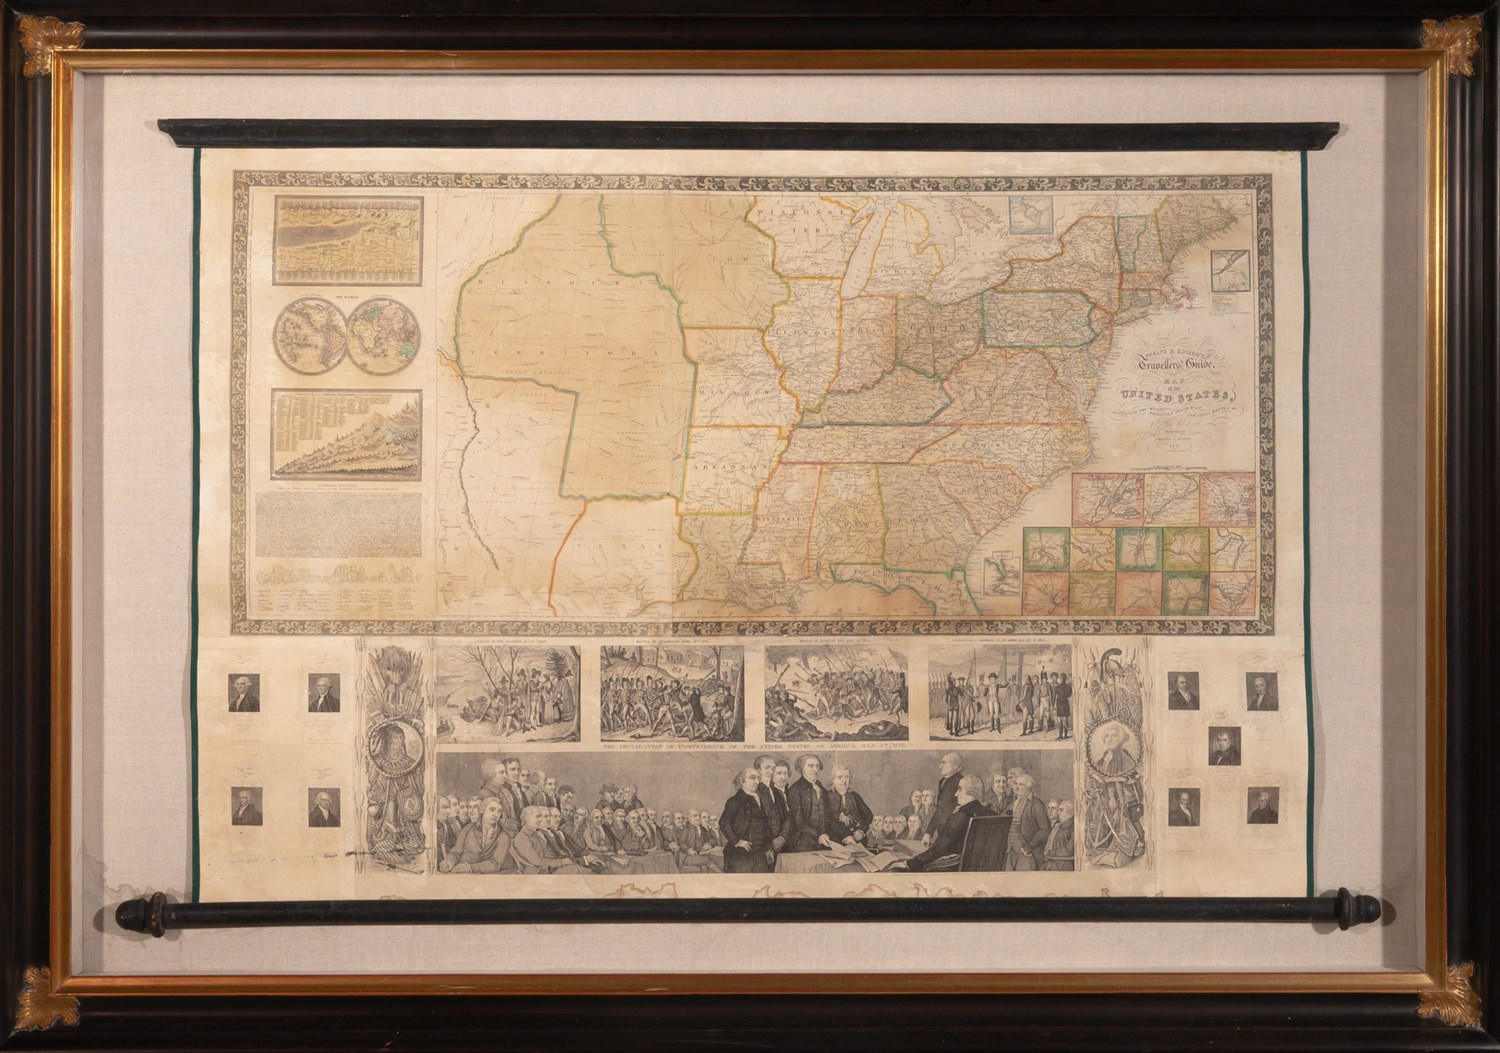 Lot 62 - [MAP--UNITED STATES] Phelps and Ensign's New...